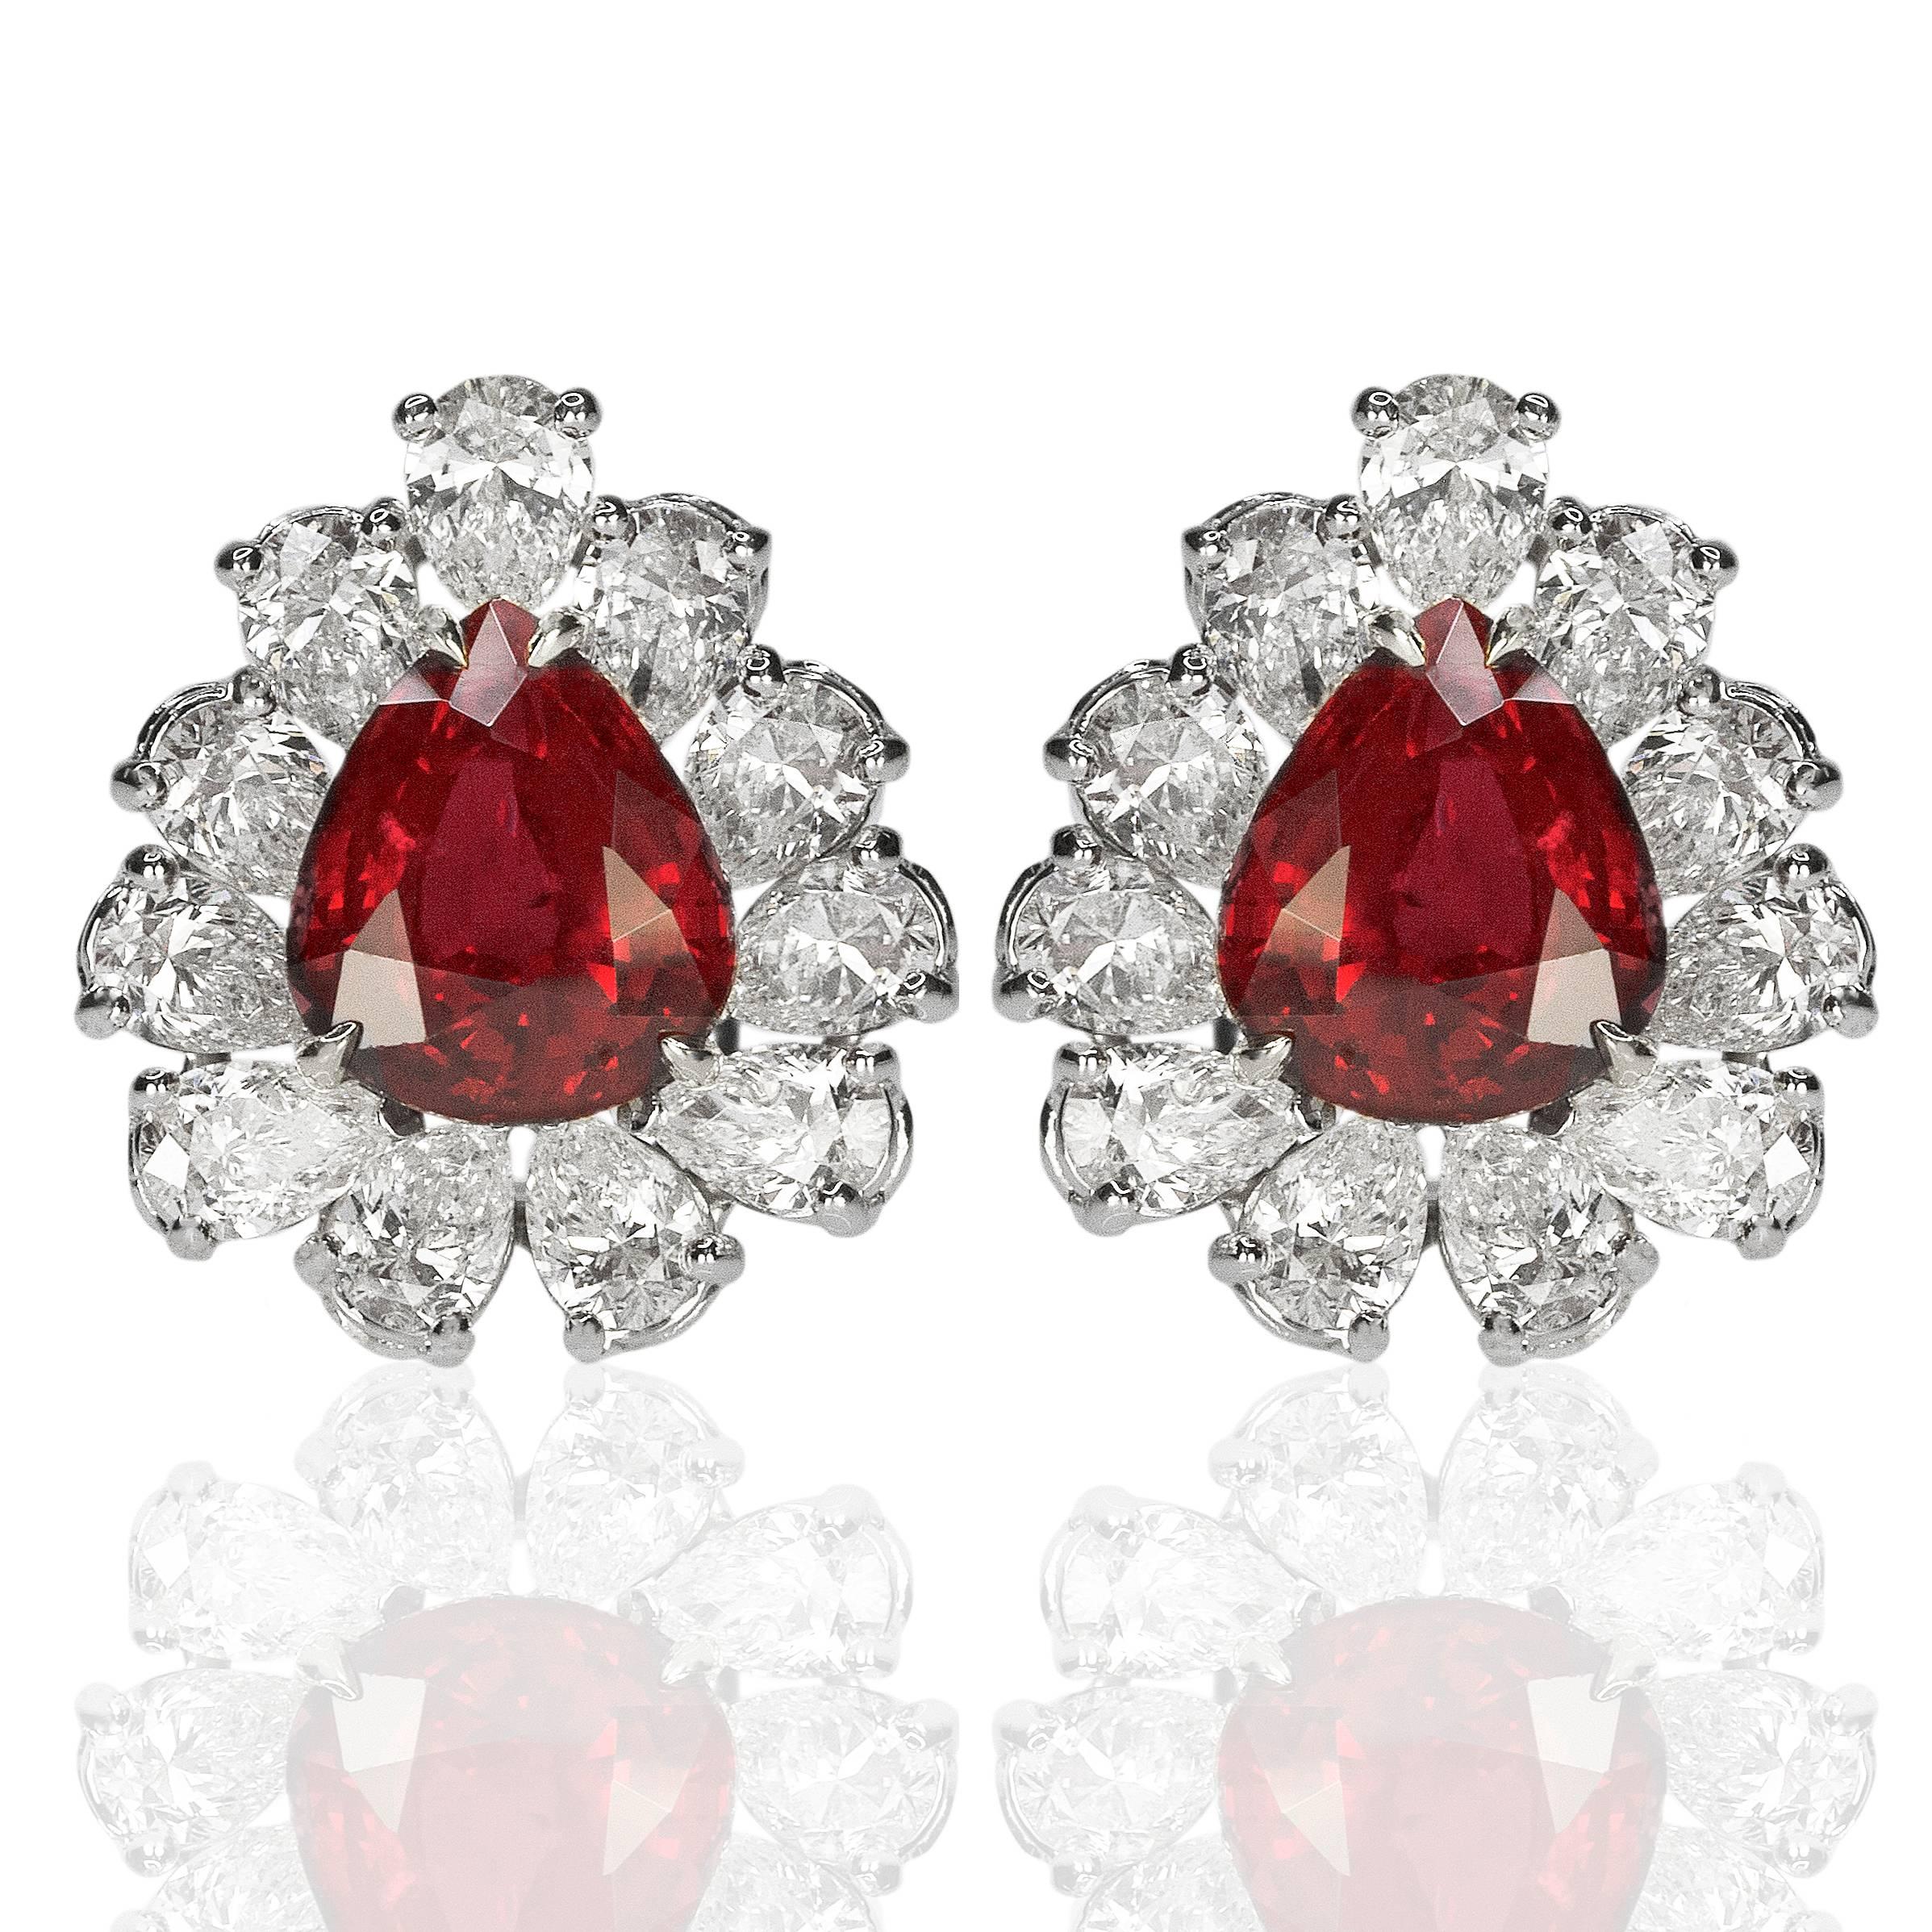 PL & 18k Earrings with 2 Dunaigre certified pear shape rubies weighing 4.70 & 4.56 carats and 22 pear shape diamonds weighing approximately 6.00 carats.